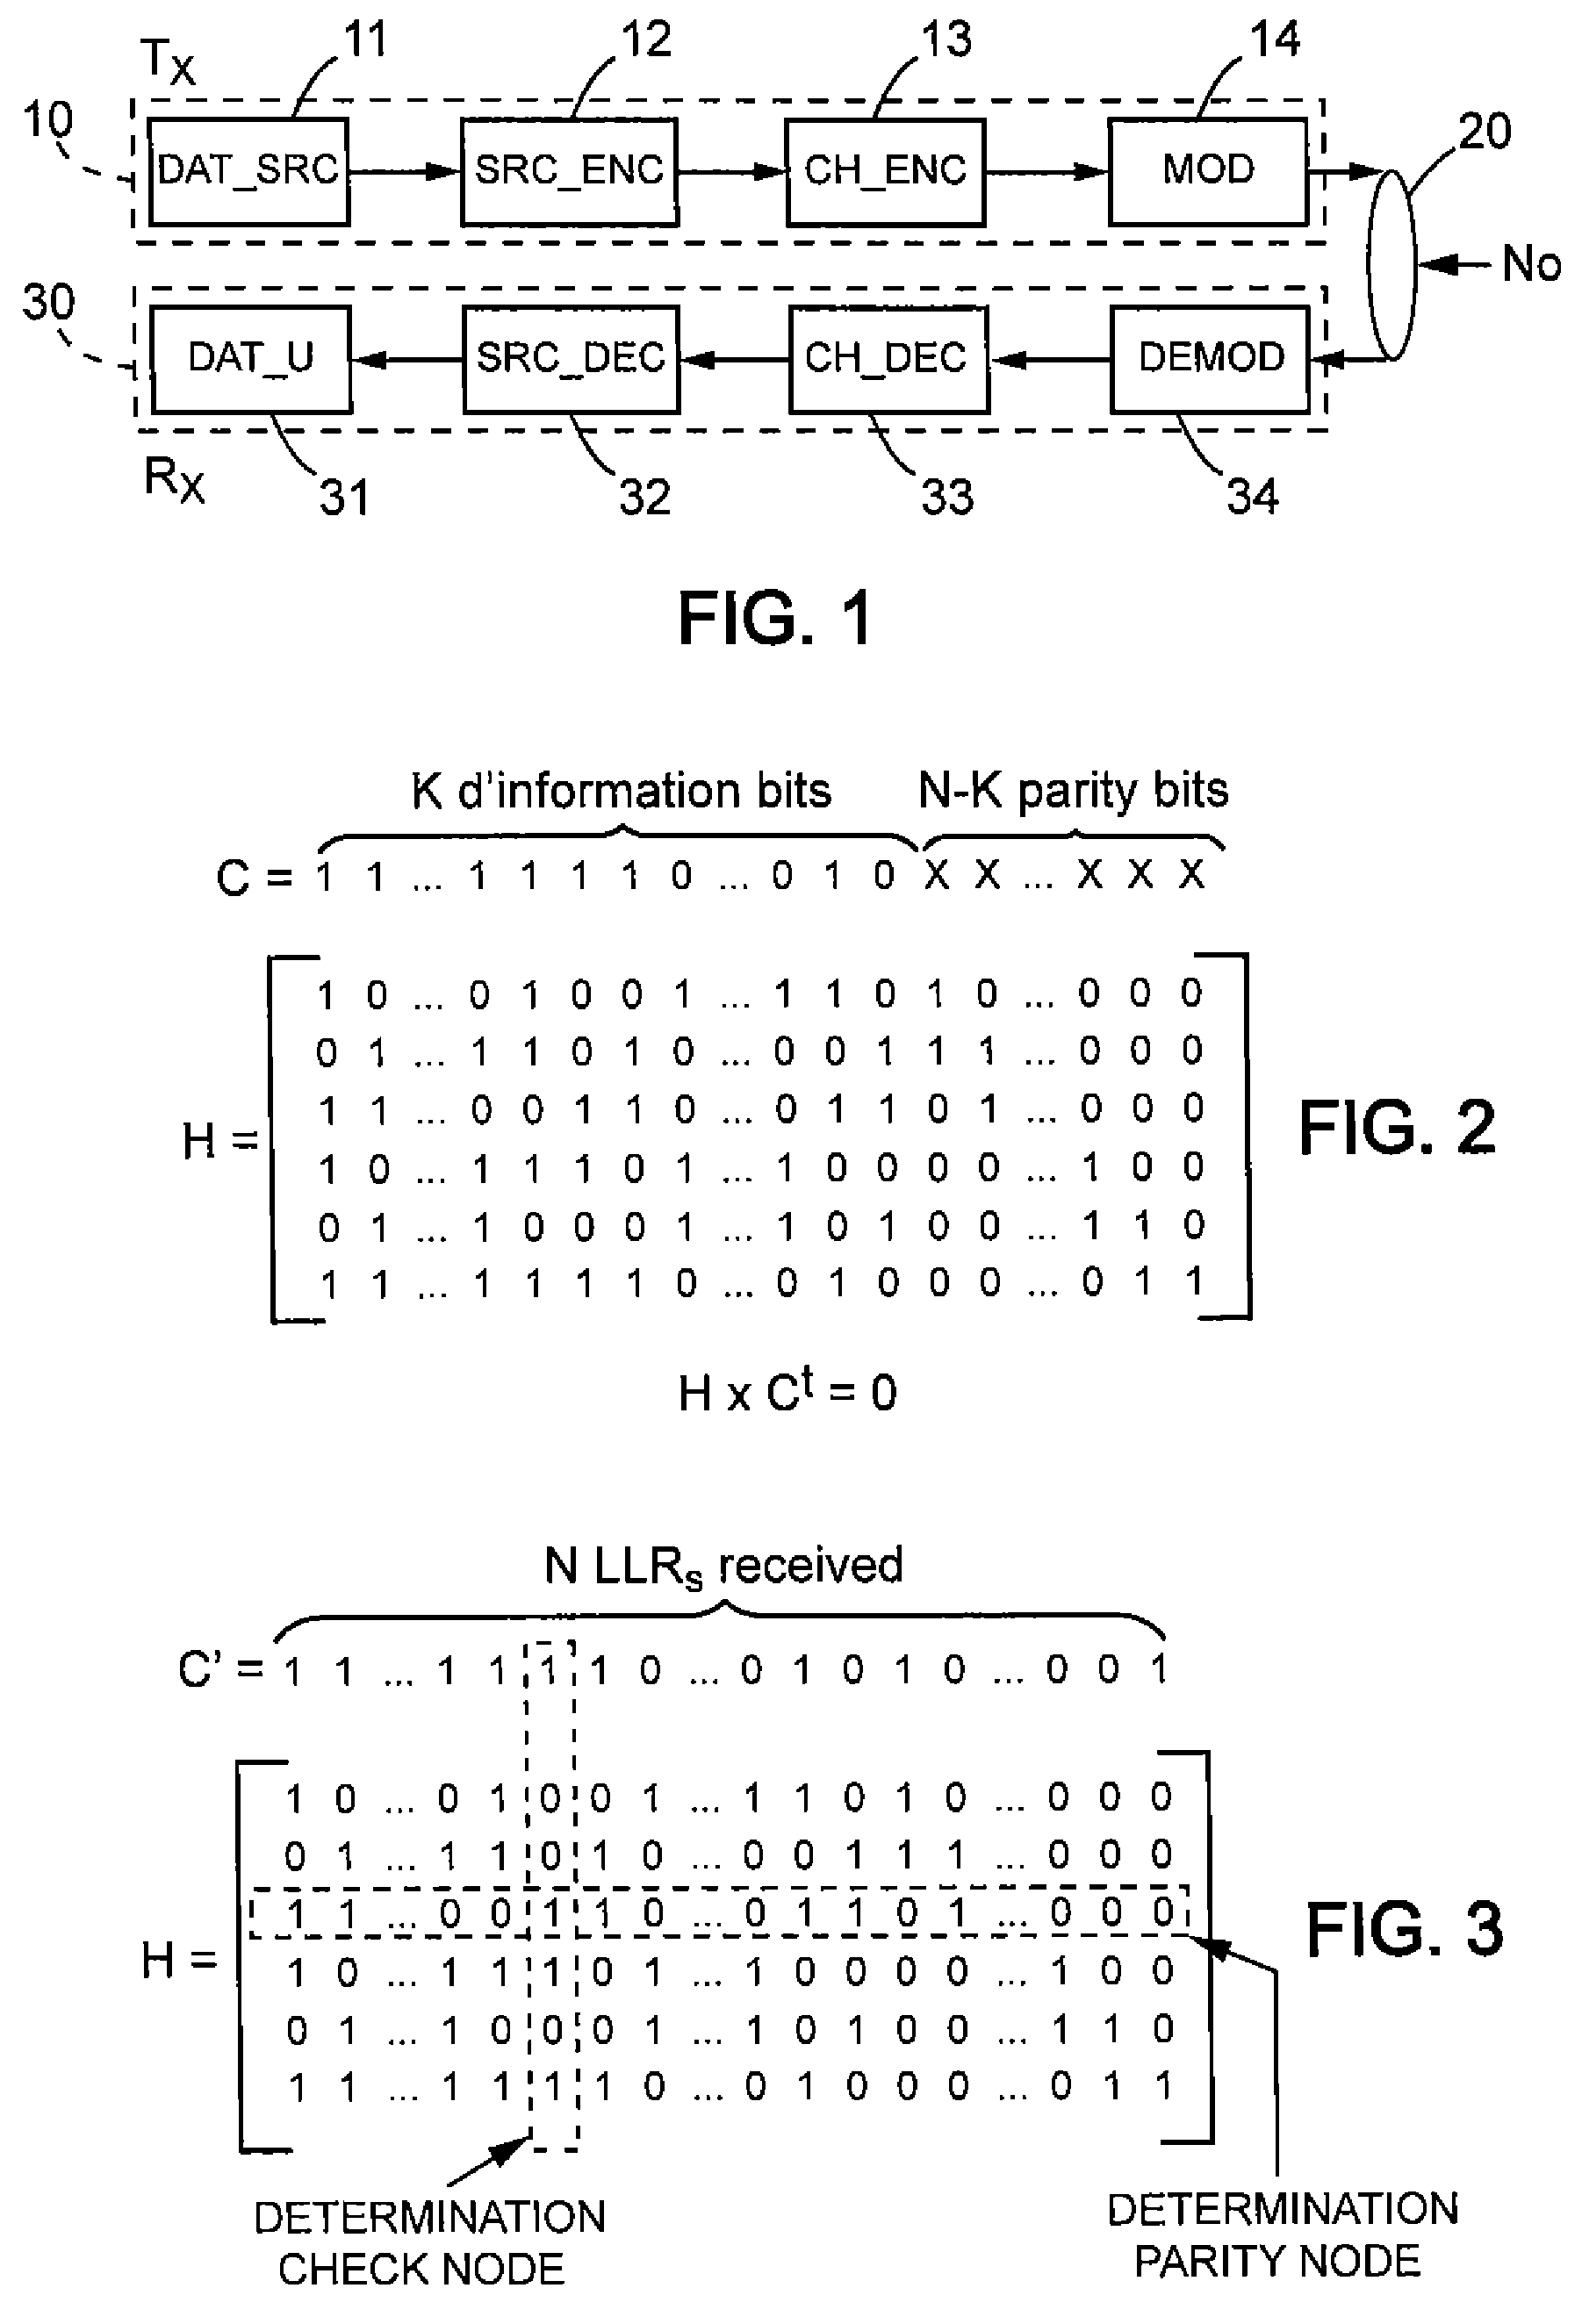 Iterative decoding of a frame of data encoded using a block coding algorithm